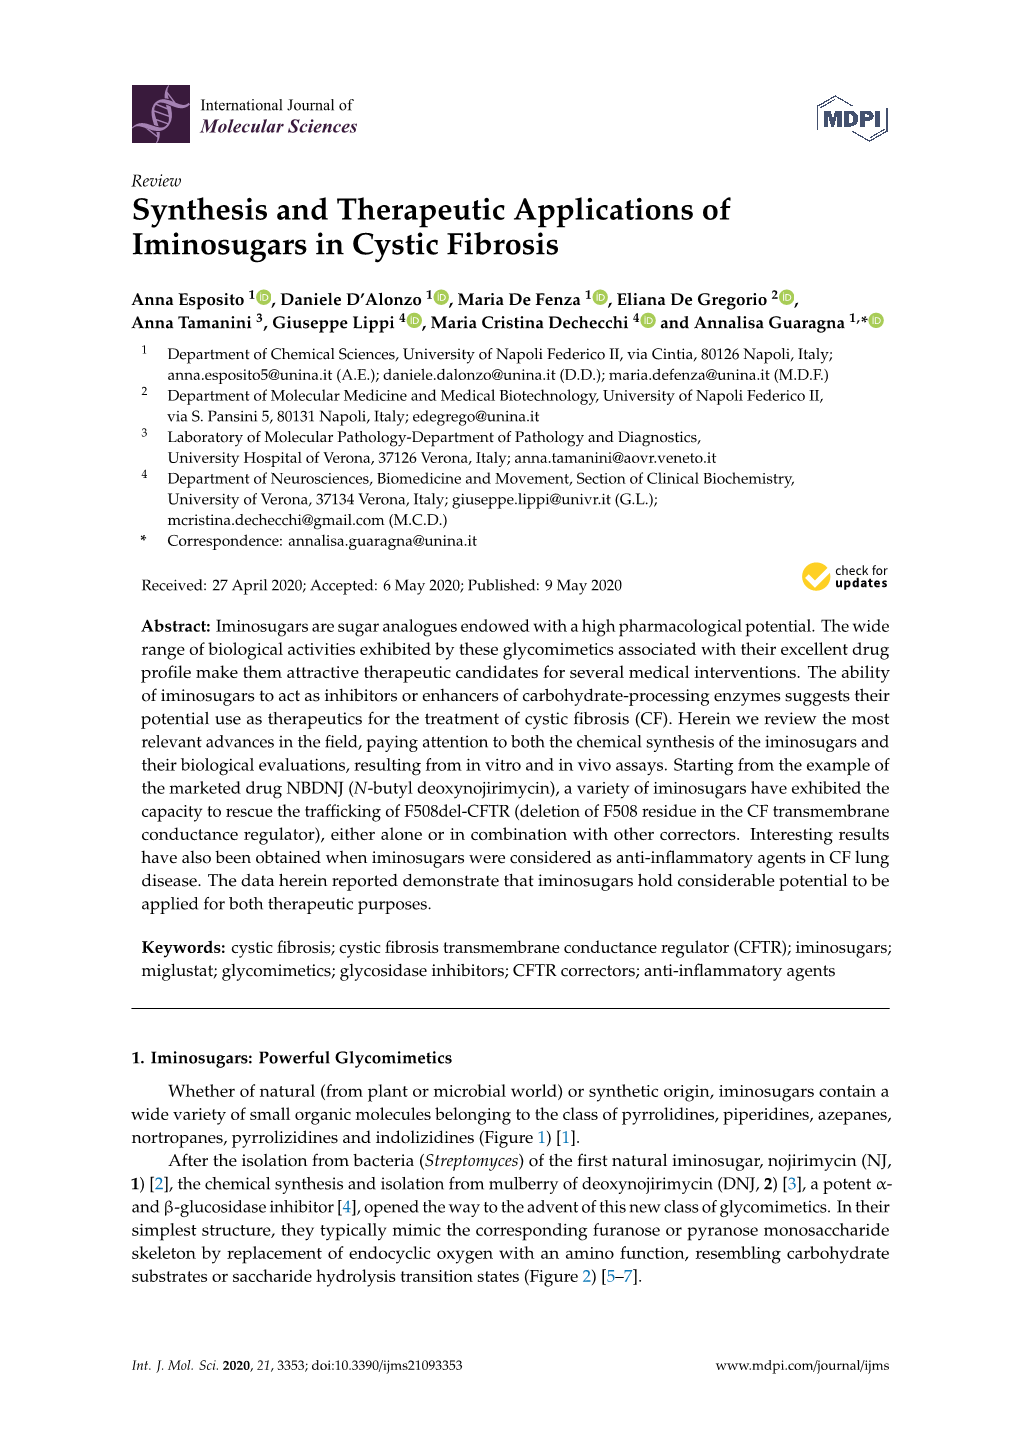 Synthesis and Therapeutic Applications of Iminosugars in Cystic Fibrosis